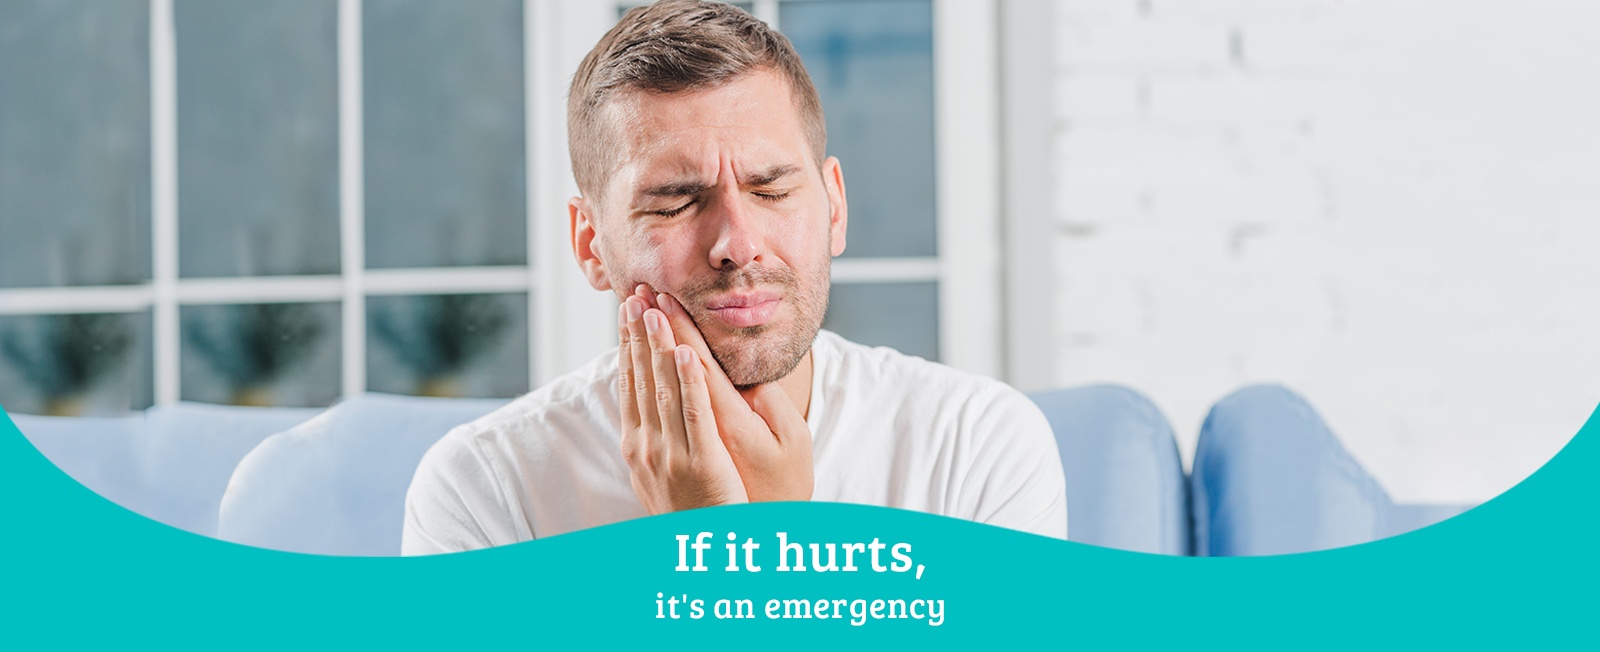 Emergency Appointments at Dentists on Bloor - Emergency Dental Clinic in Toronto, ON